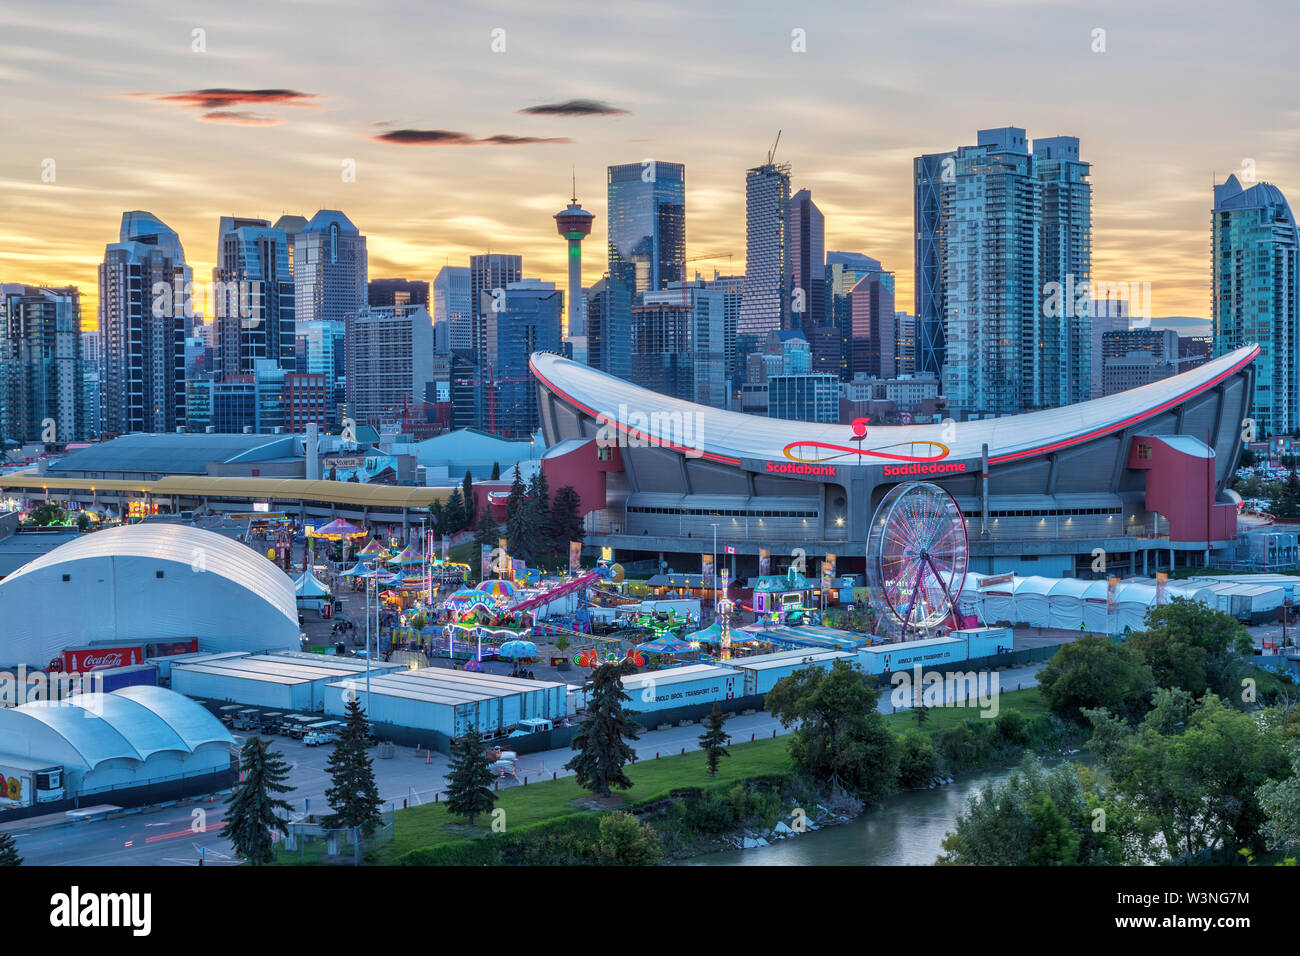 CALGARY, CANADA - JULY 14, 2019: Sunset over Calgary skyline with the annual Stampede event at the Saddledome grounds. The Calgary Stampede is renowne Stock Photo